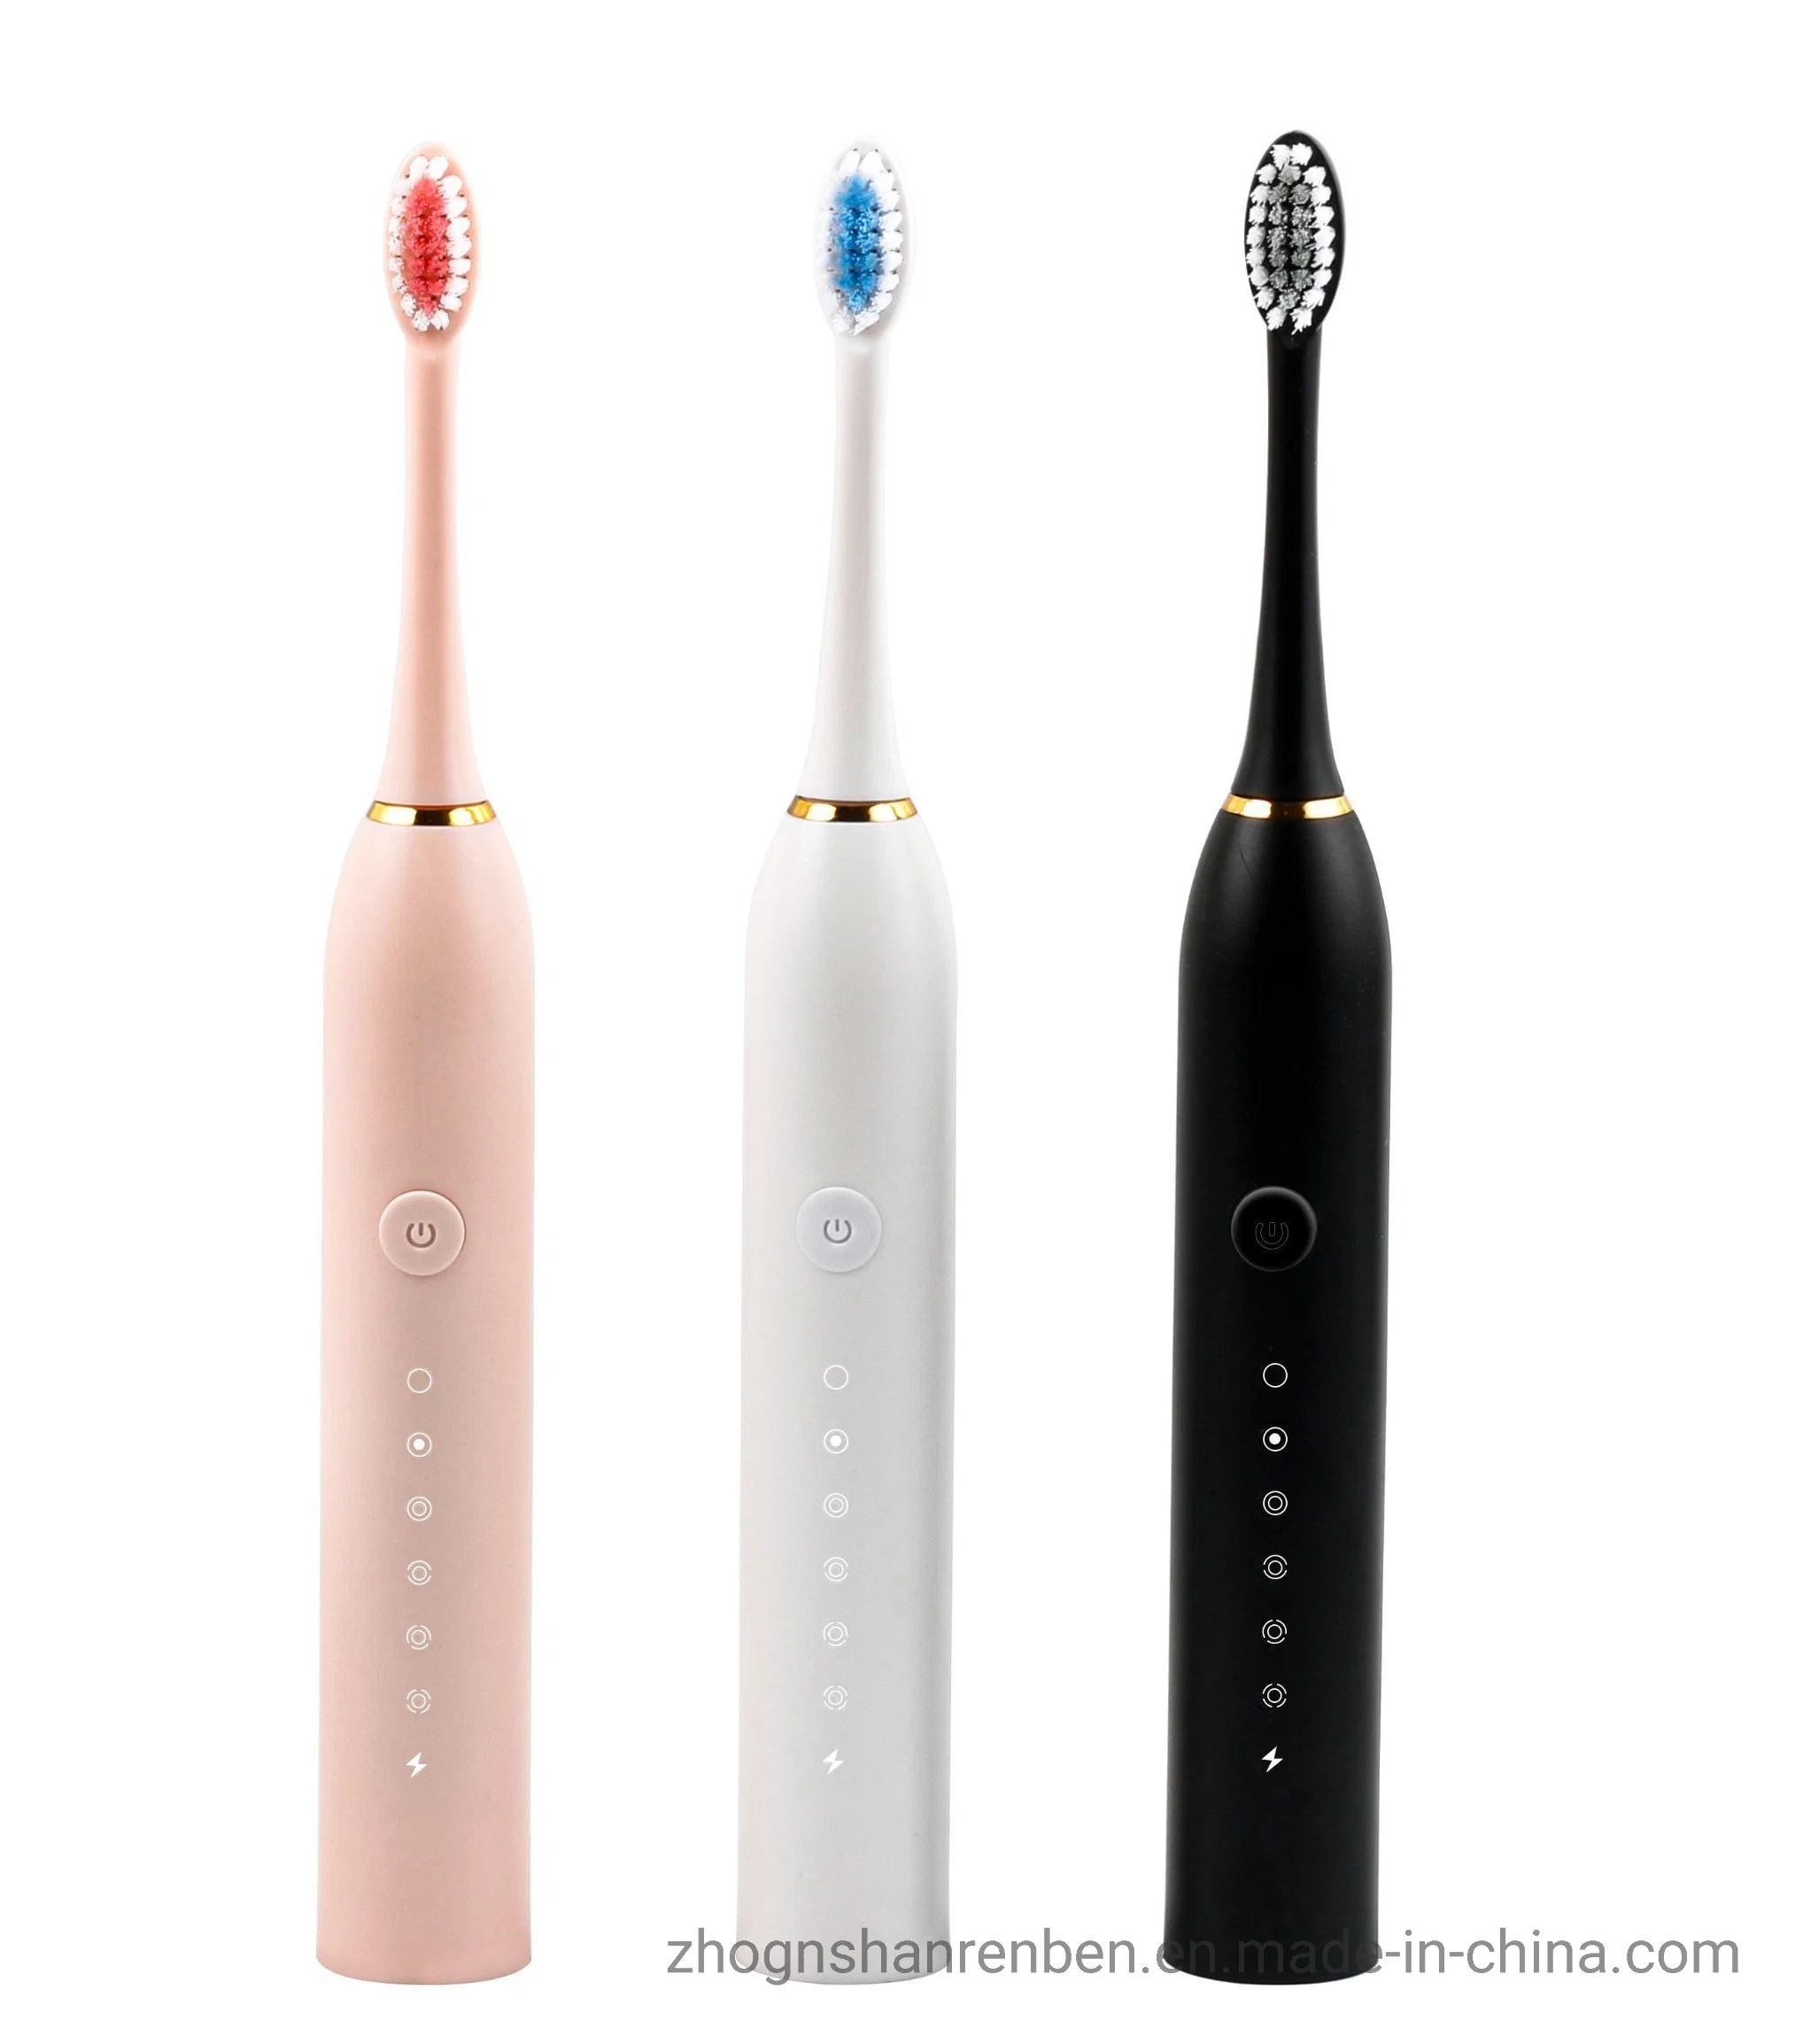 Personal Dental Health Sound Wave Technology Adult Intelligent Sonic Electric Tooth Brush